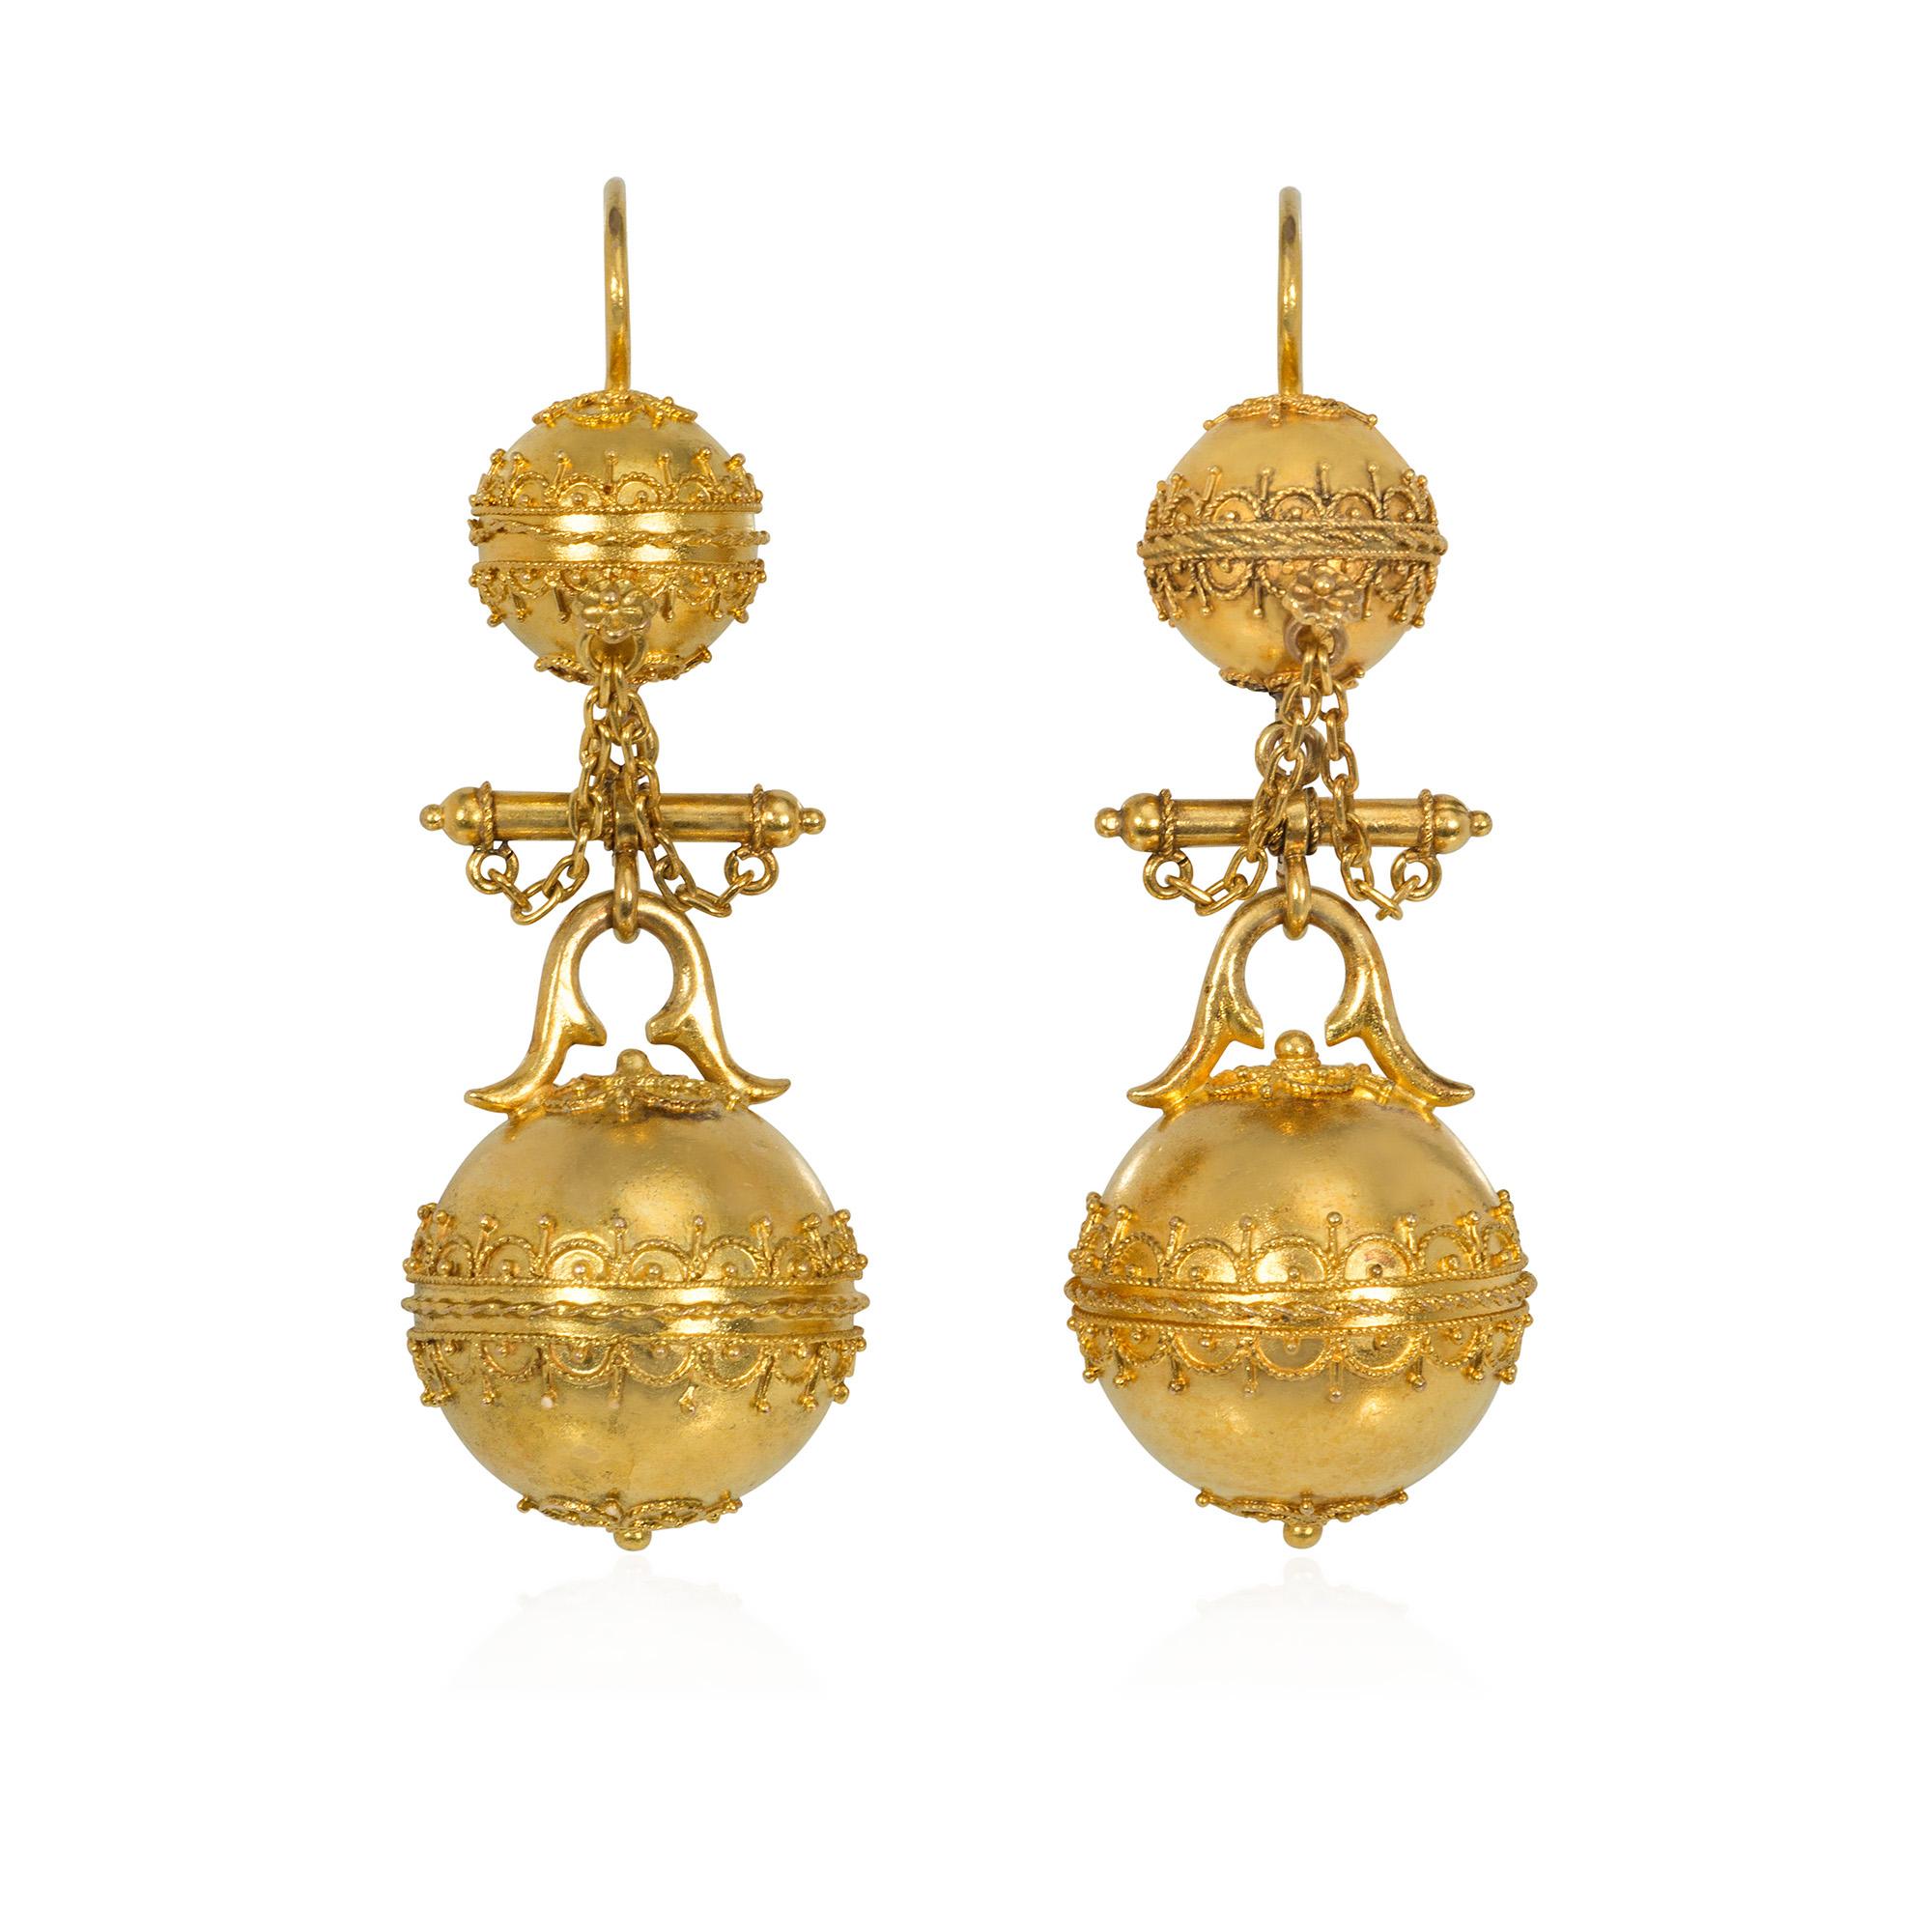 Antique Etruscan Revival Gold Bead and Wirework Pendant Earrings For Sale